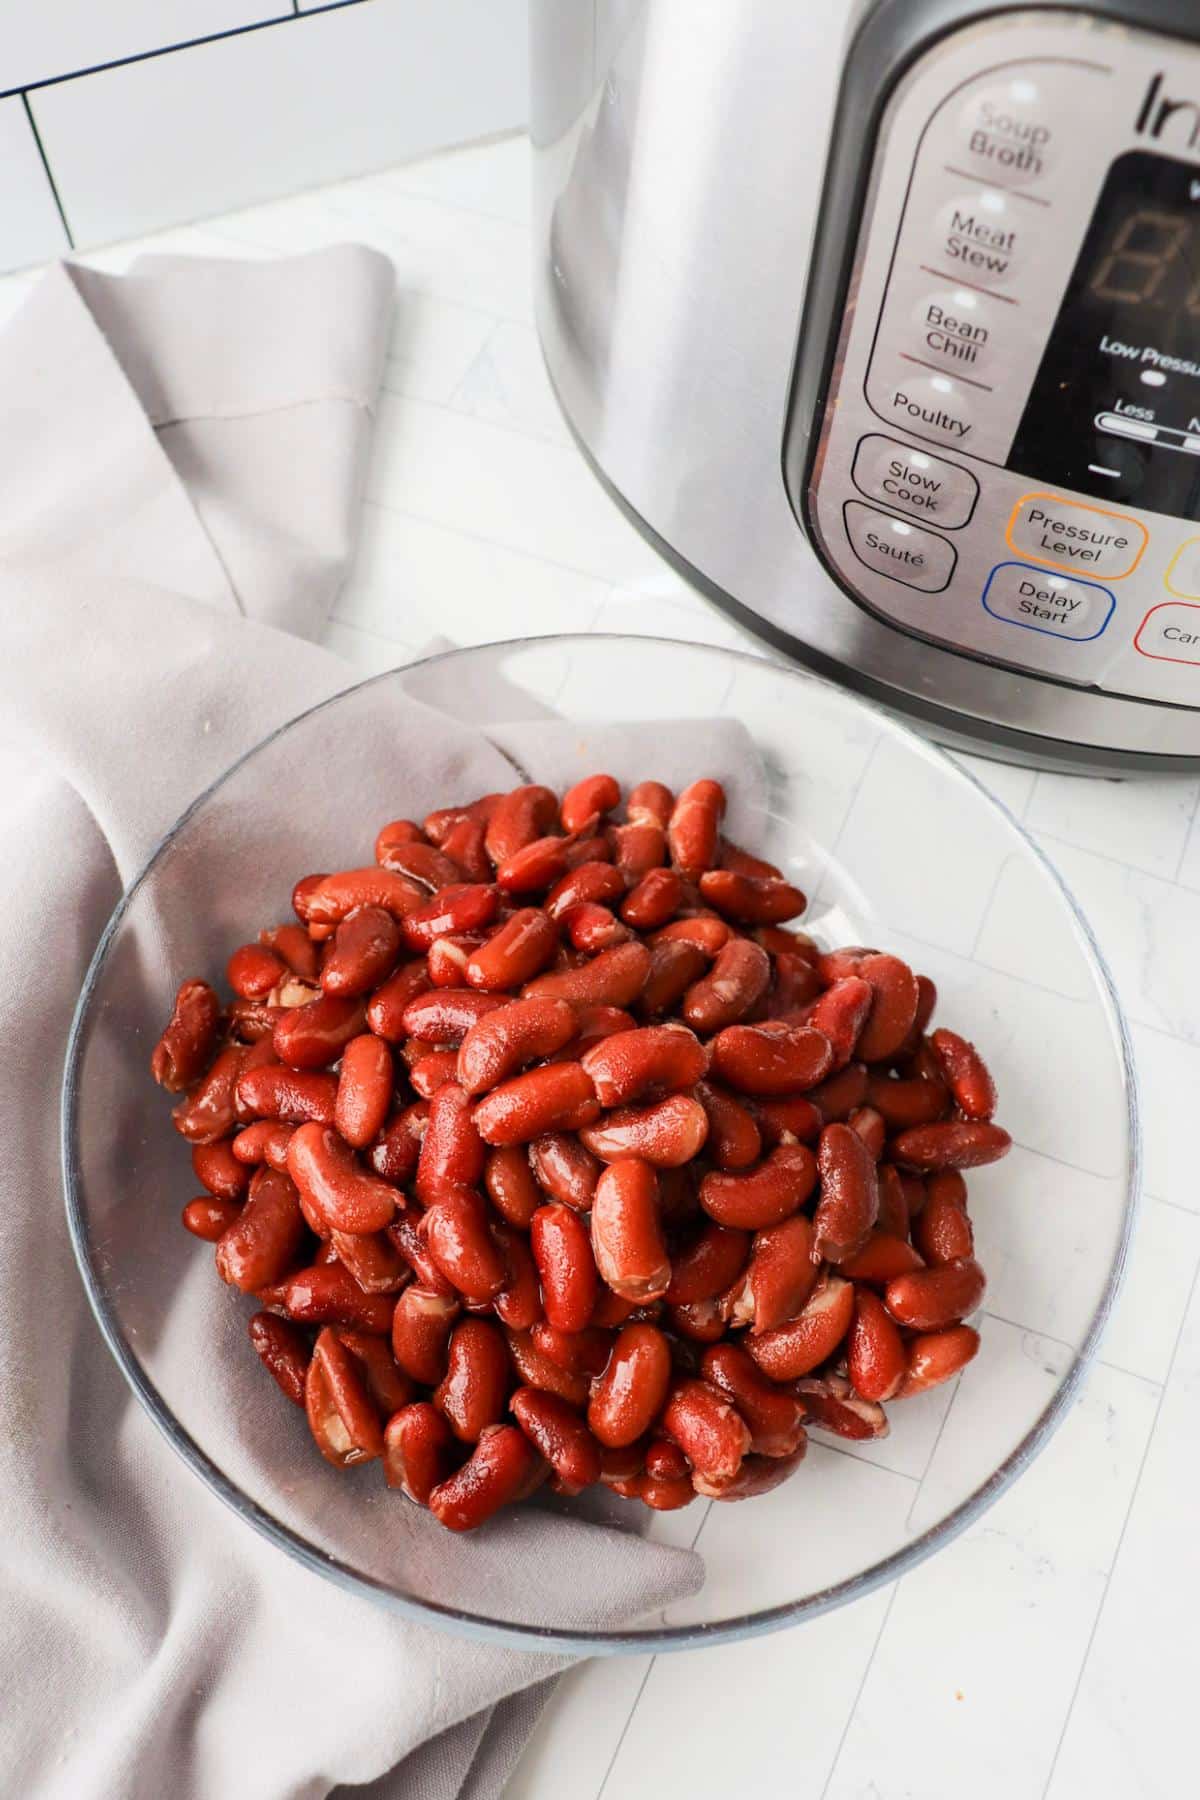 Bowl of kidney beans that were cooked in an instant pot next to an instant pot.